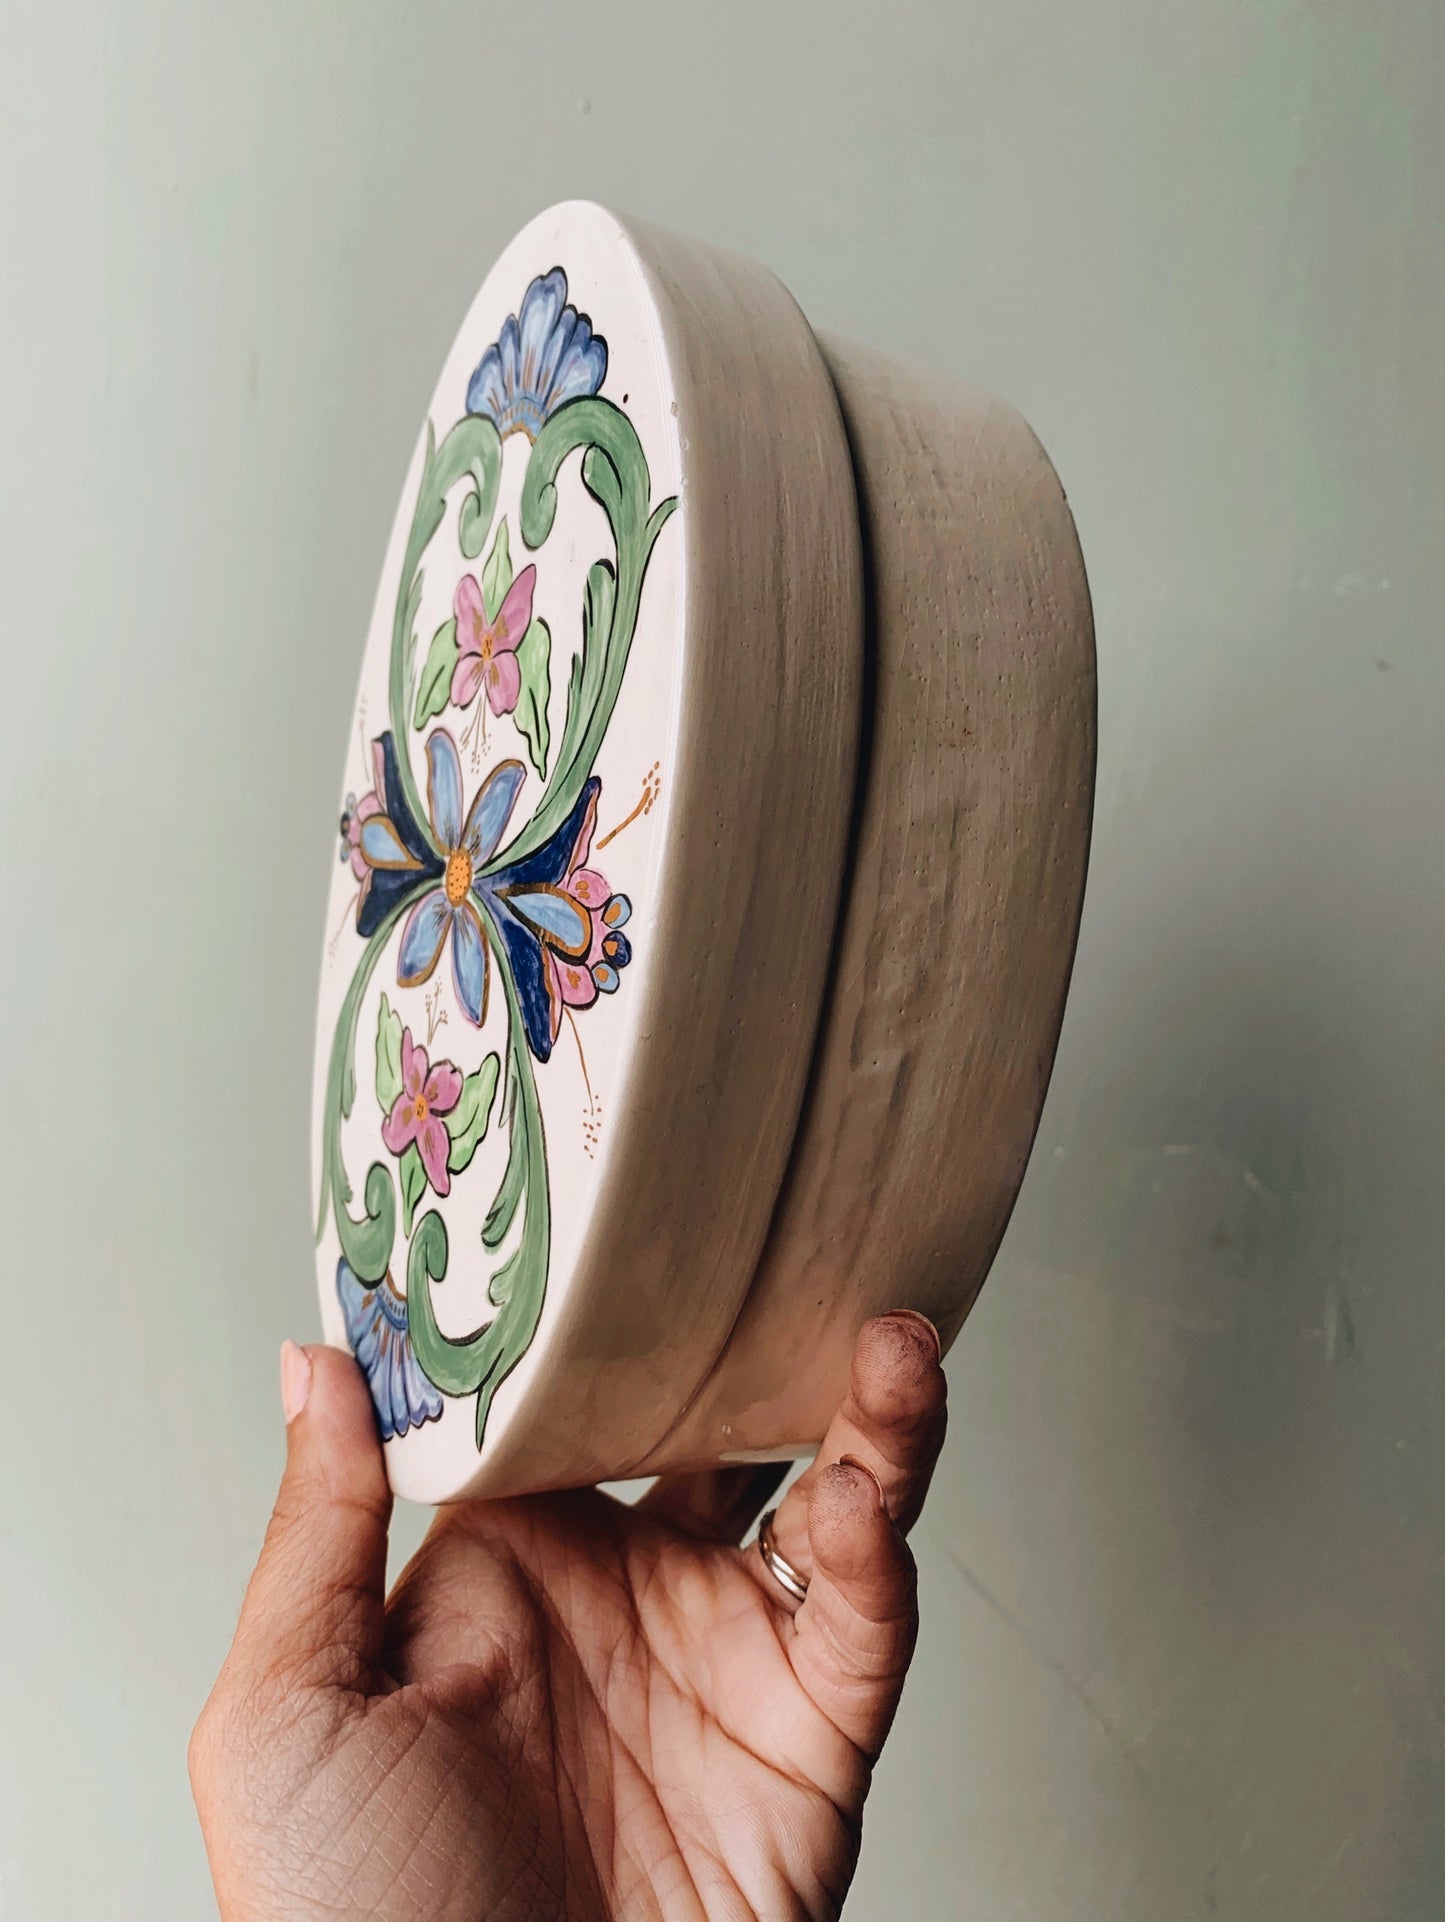 Vintage Hand~painted Floral Decorative Ceramic Dish with Lif